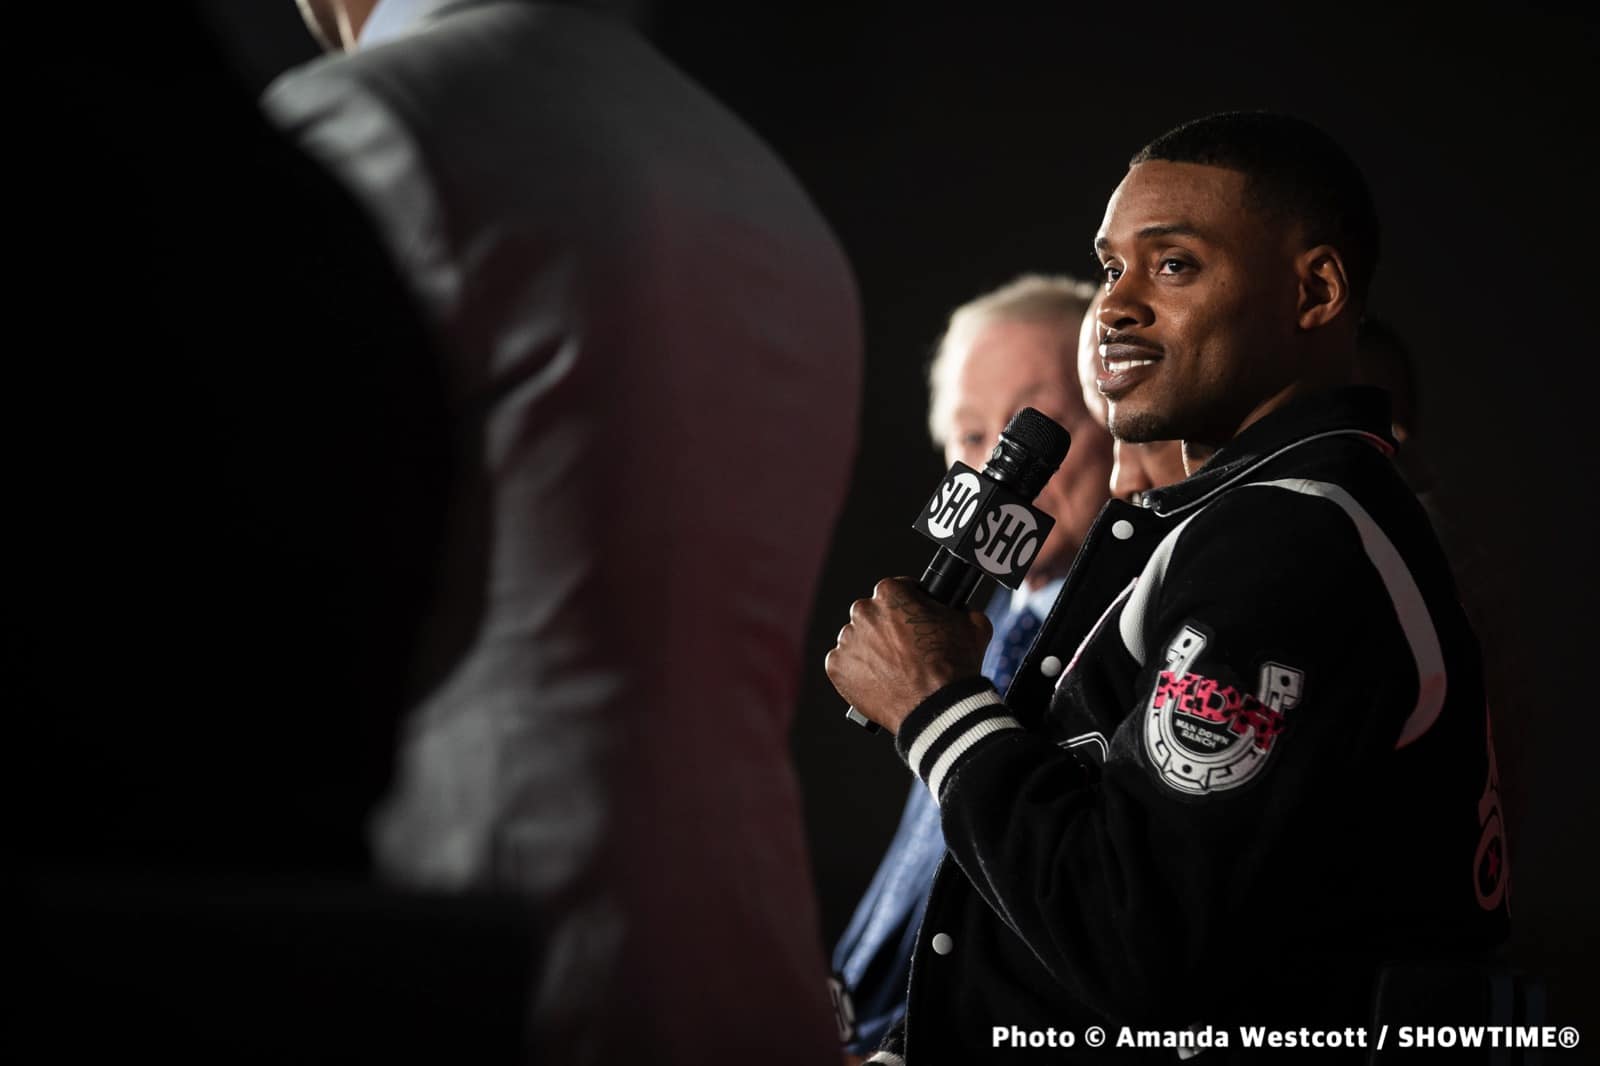 Image: Errol Spence: 'This is my third chance in boxing'